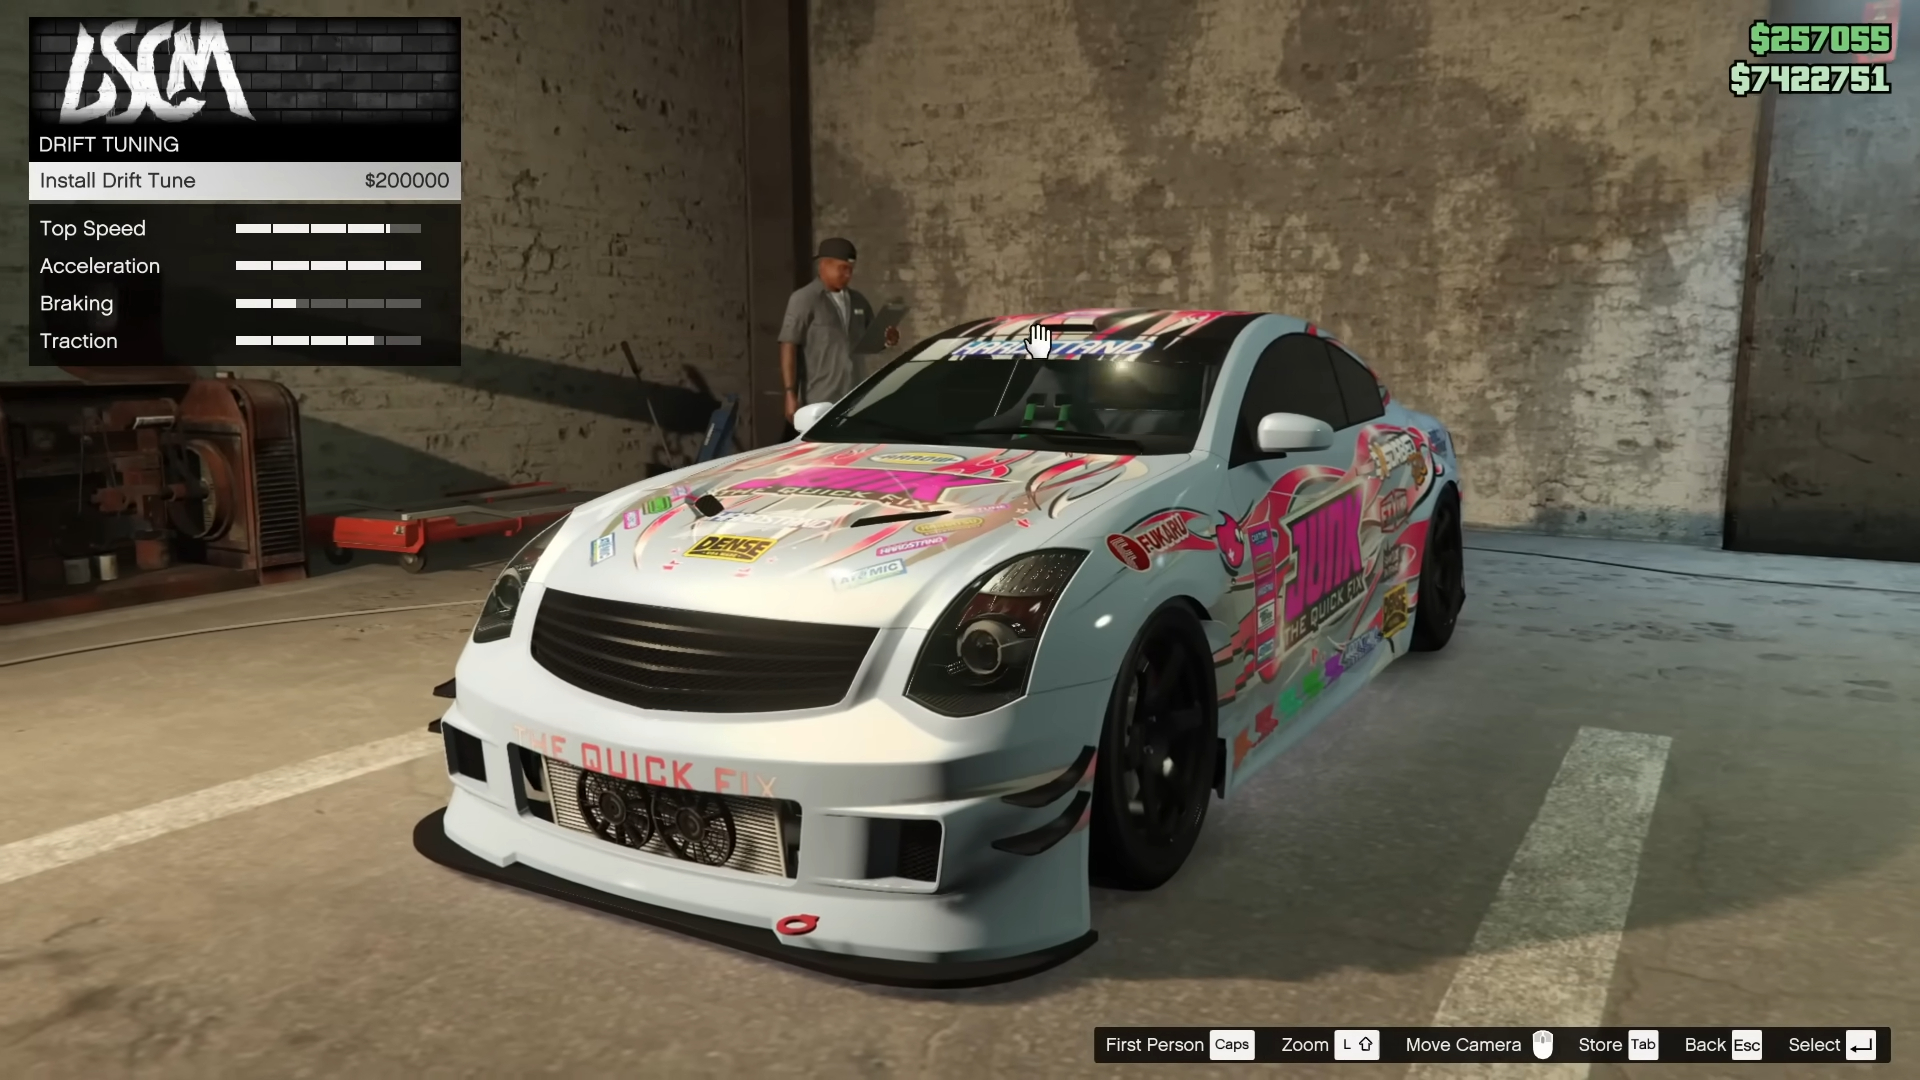 How to get Drift Tuning in GTA Online